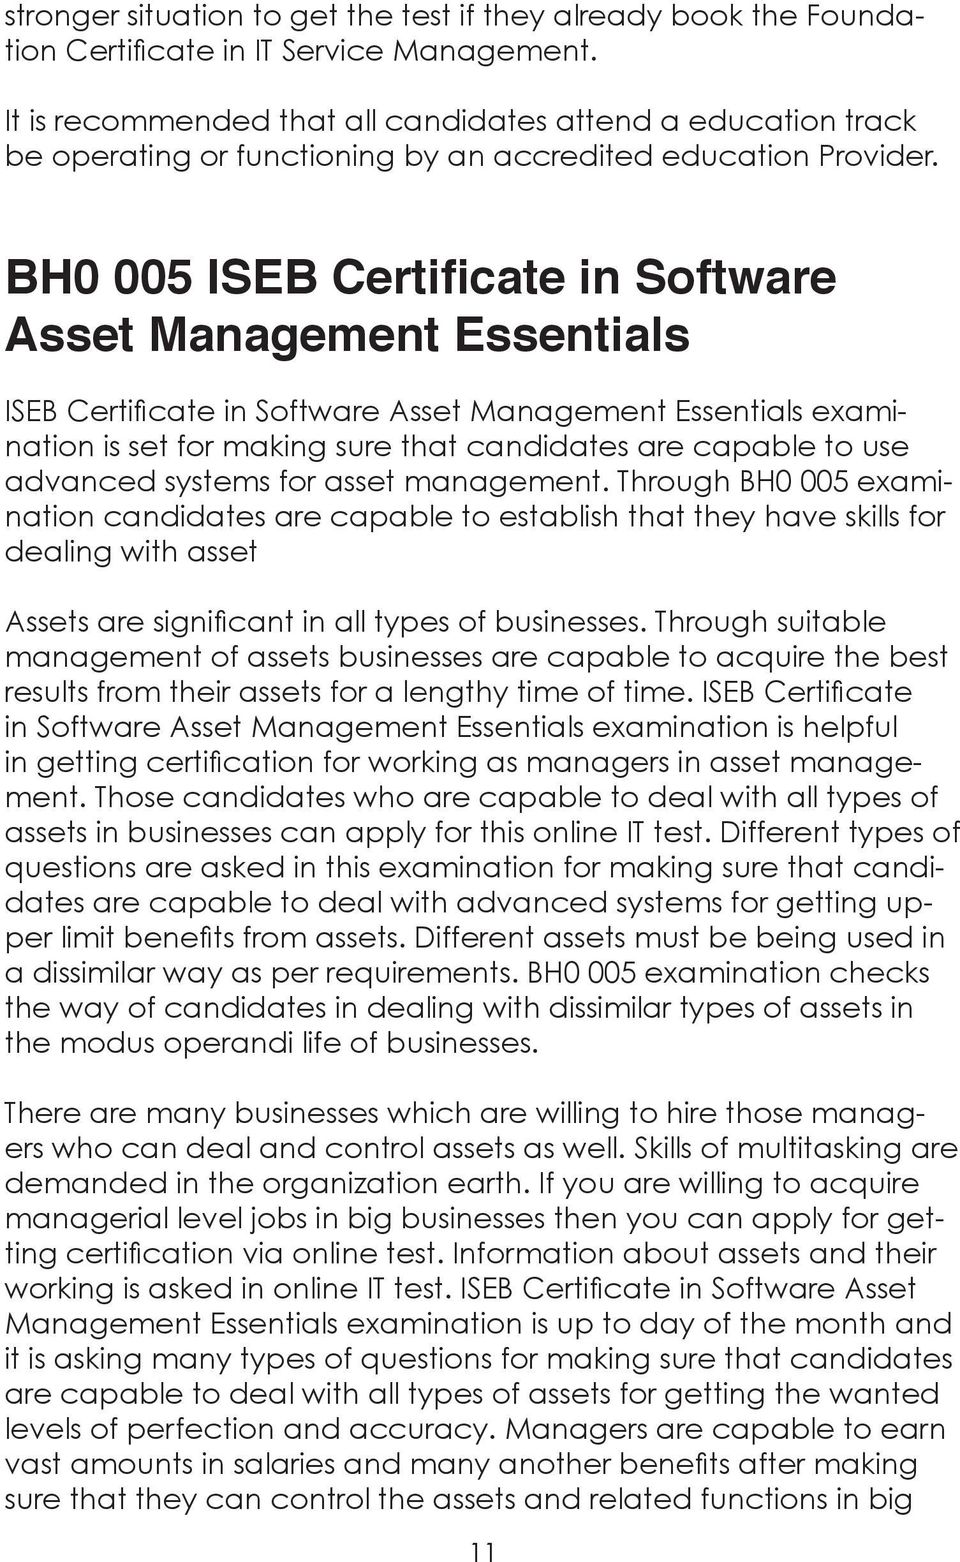 BH0 005 ISEB Certificate in Software Asset Management Essentials ISEB Certificate in Software Asset Management Essentials examination is set for making sure that candidates are capable to use